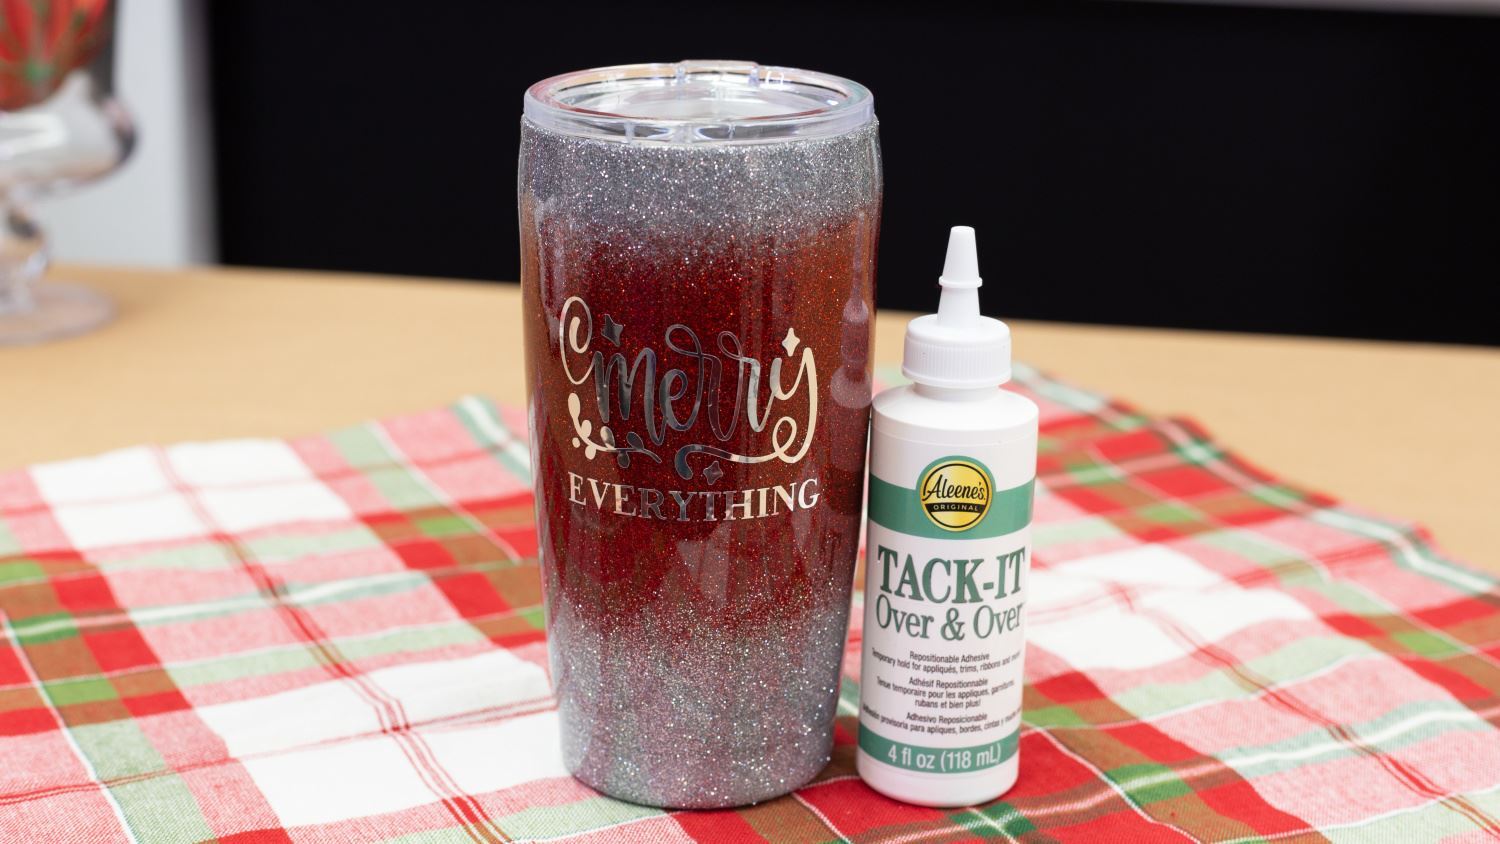 Aleene's Original Glues - How to Make a Glitter Tumbler with the Tack-It  Method